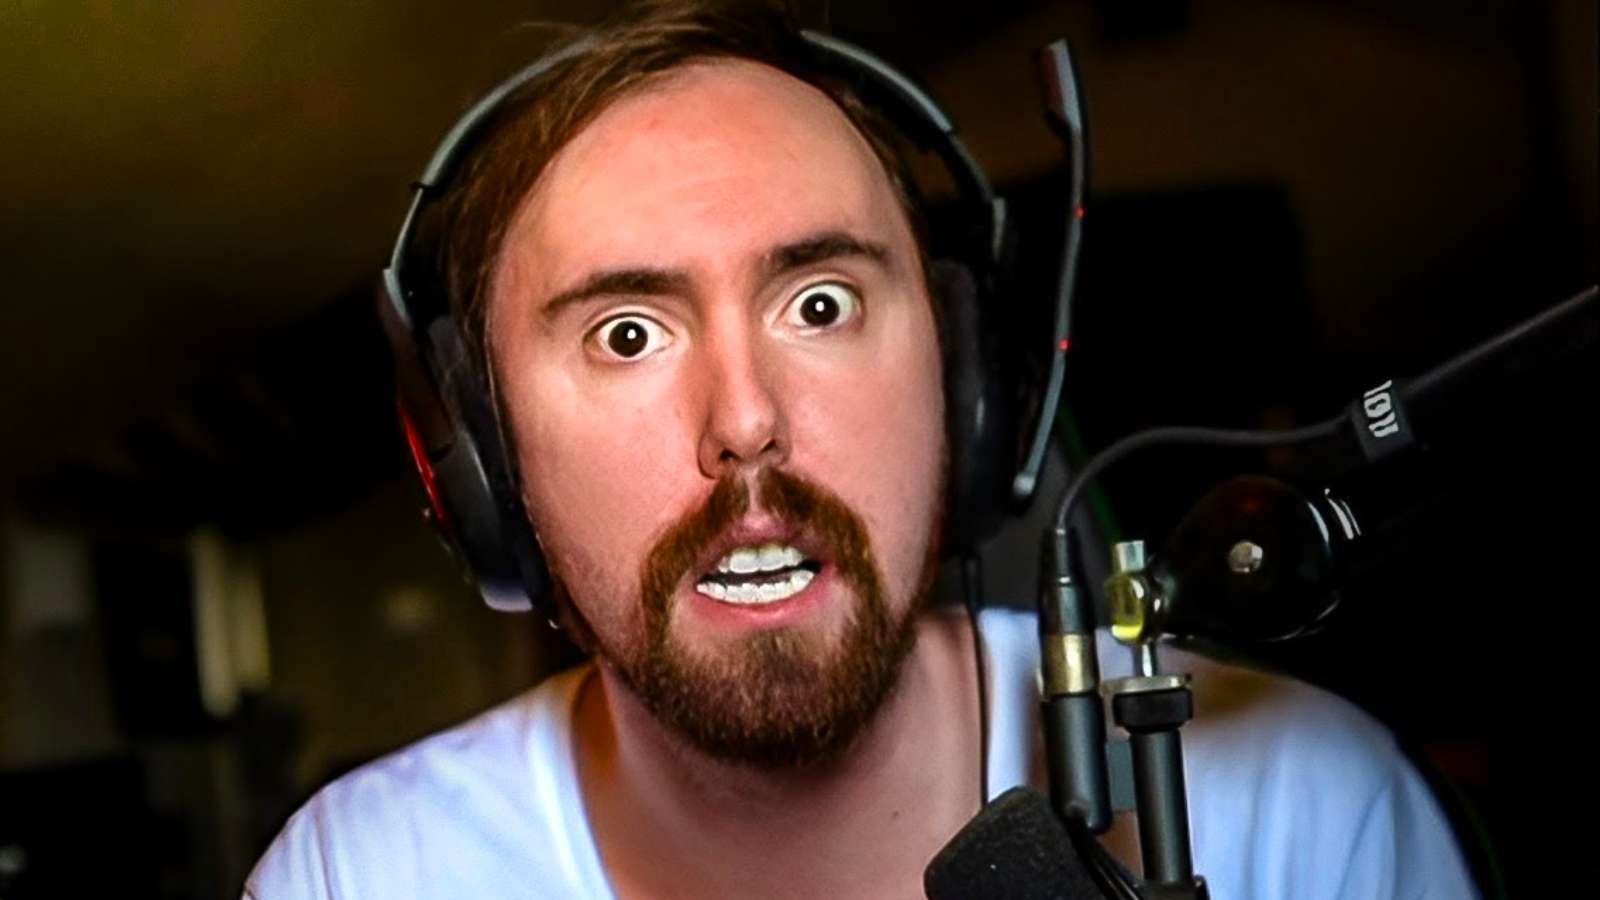 Asmongold during YouTube video.